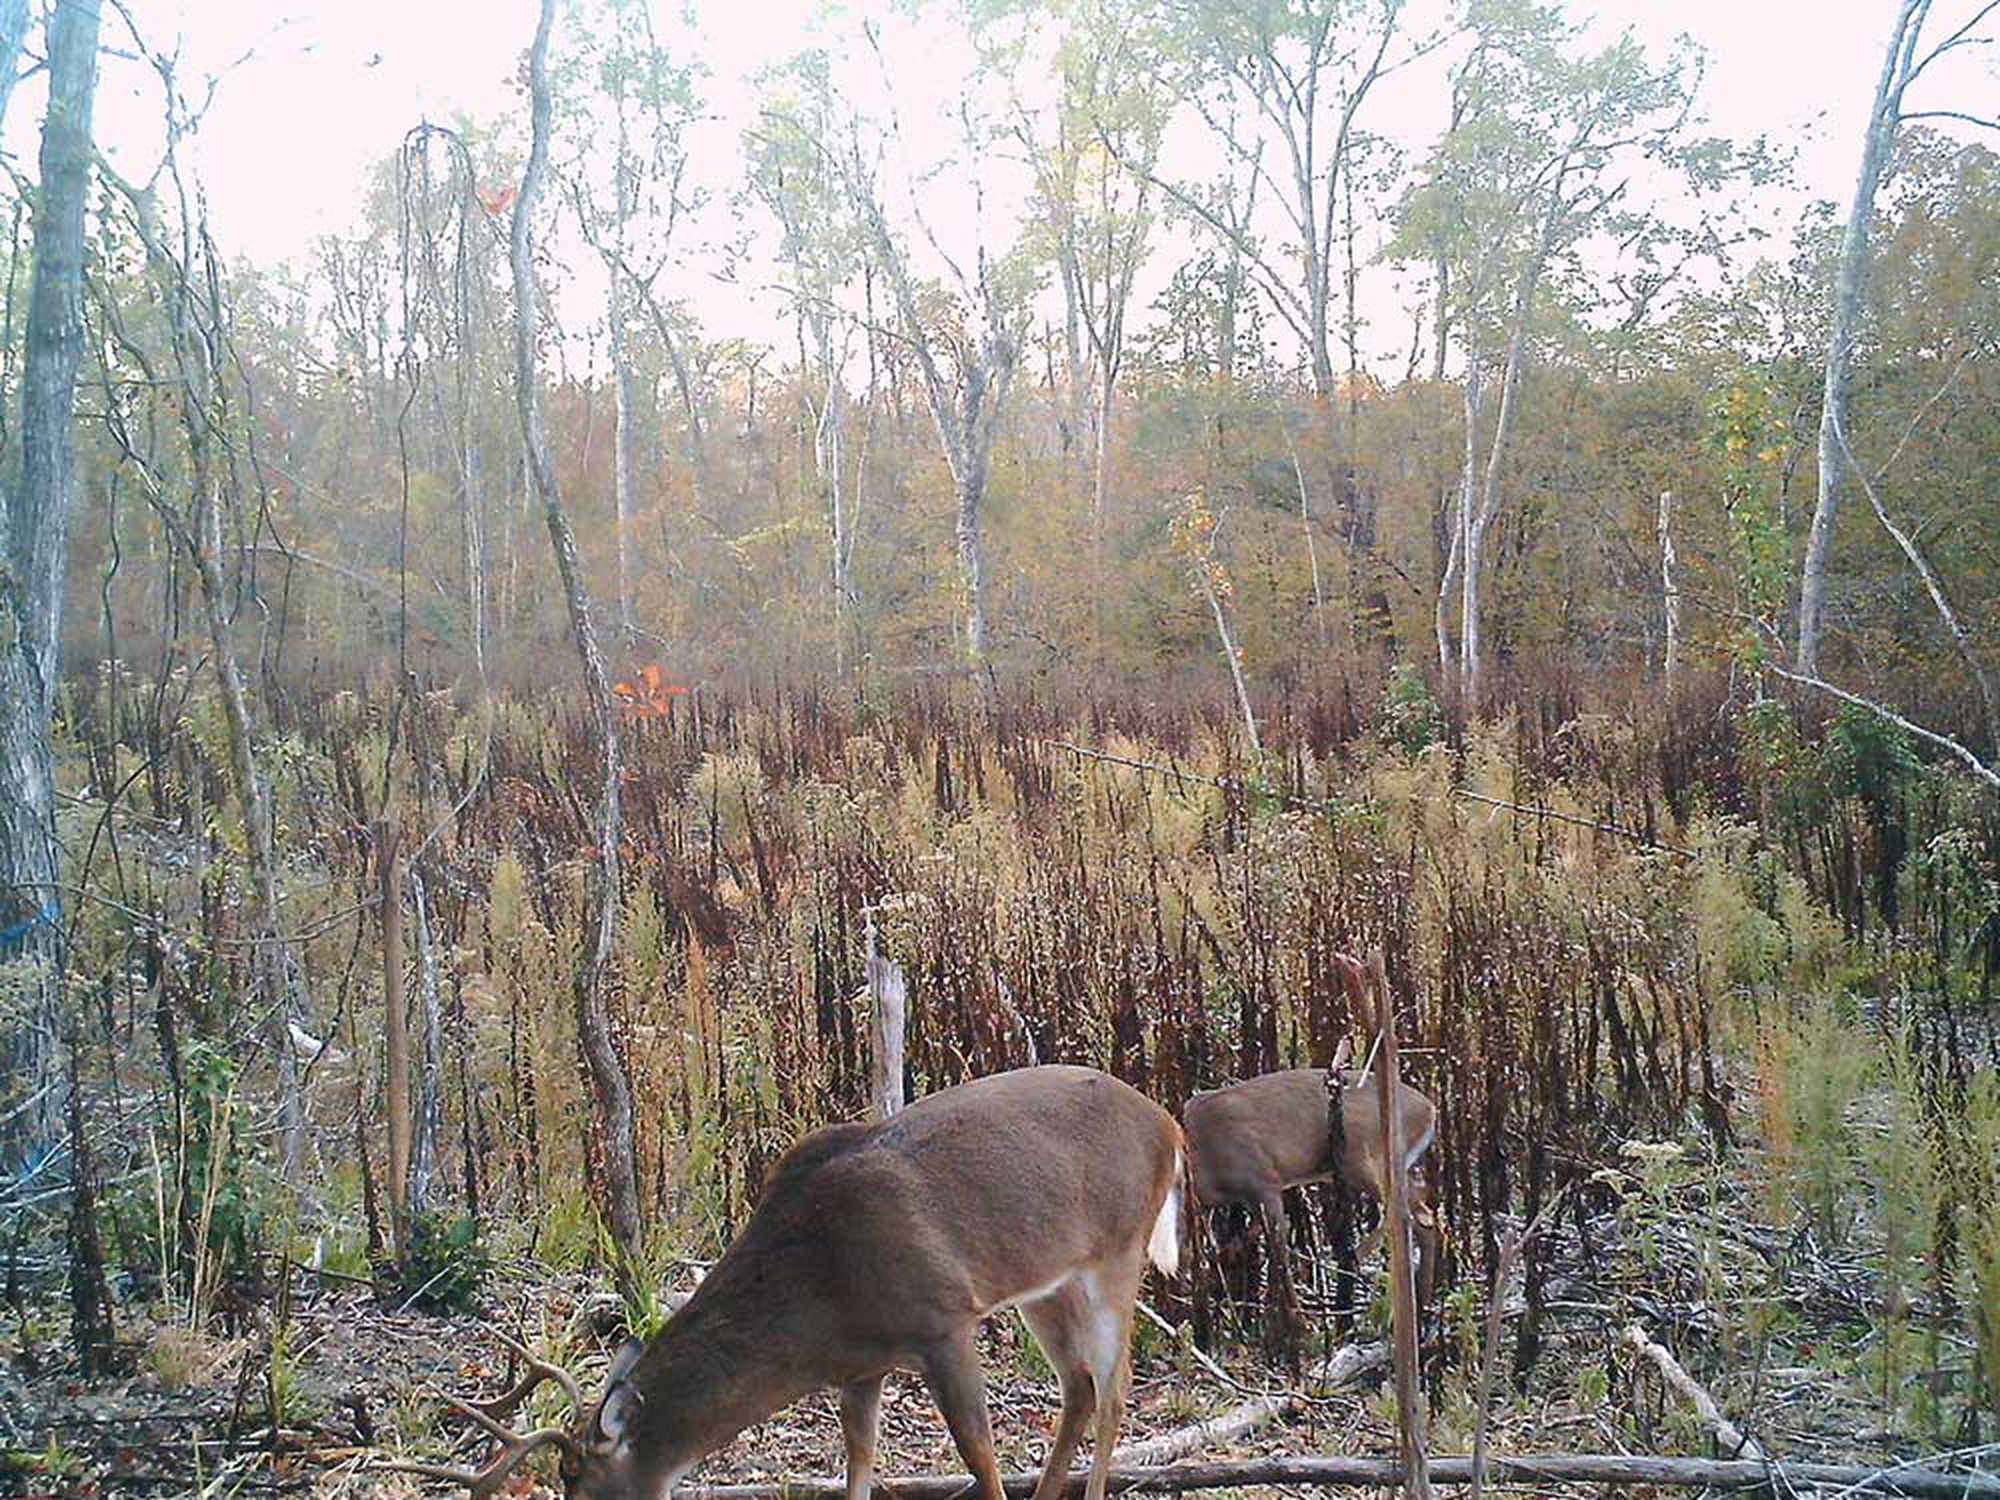 Trail camera images from the author's study showed mature bucks moving during daylight hours.